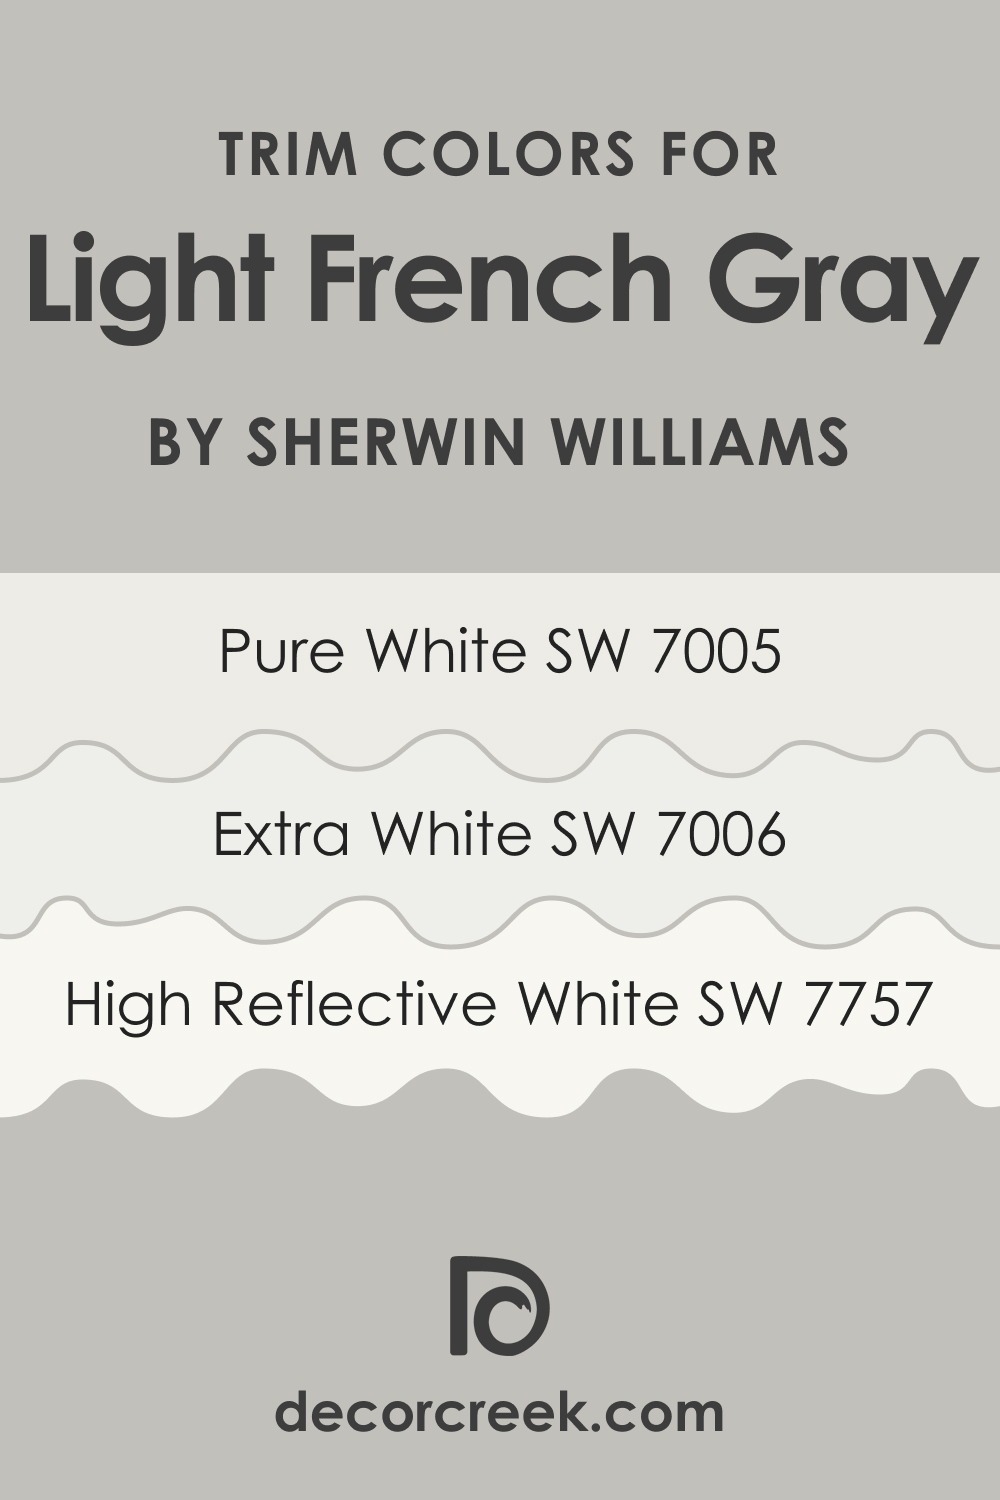 Trim Colors of SW 0055 Light French Gray